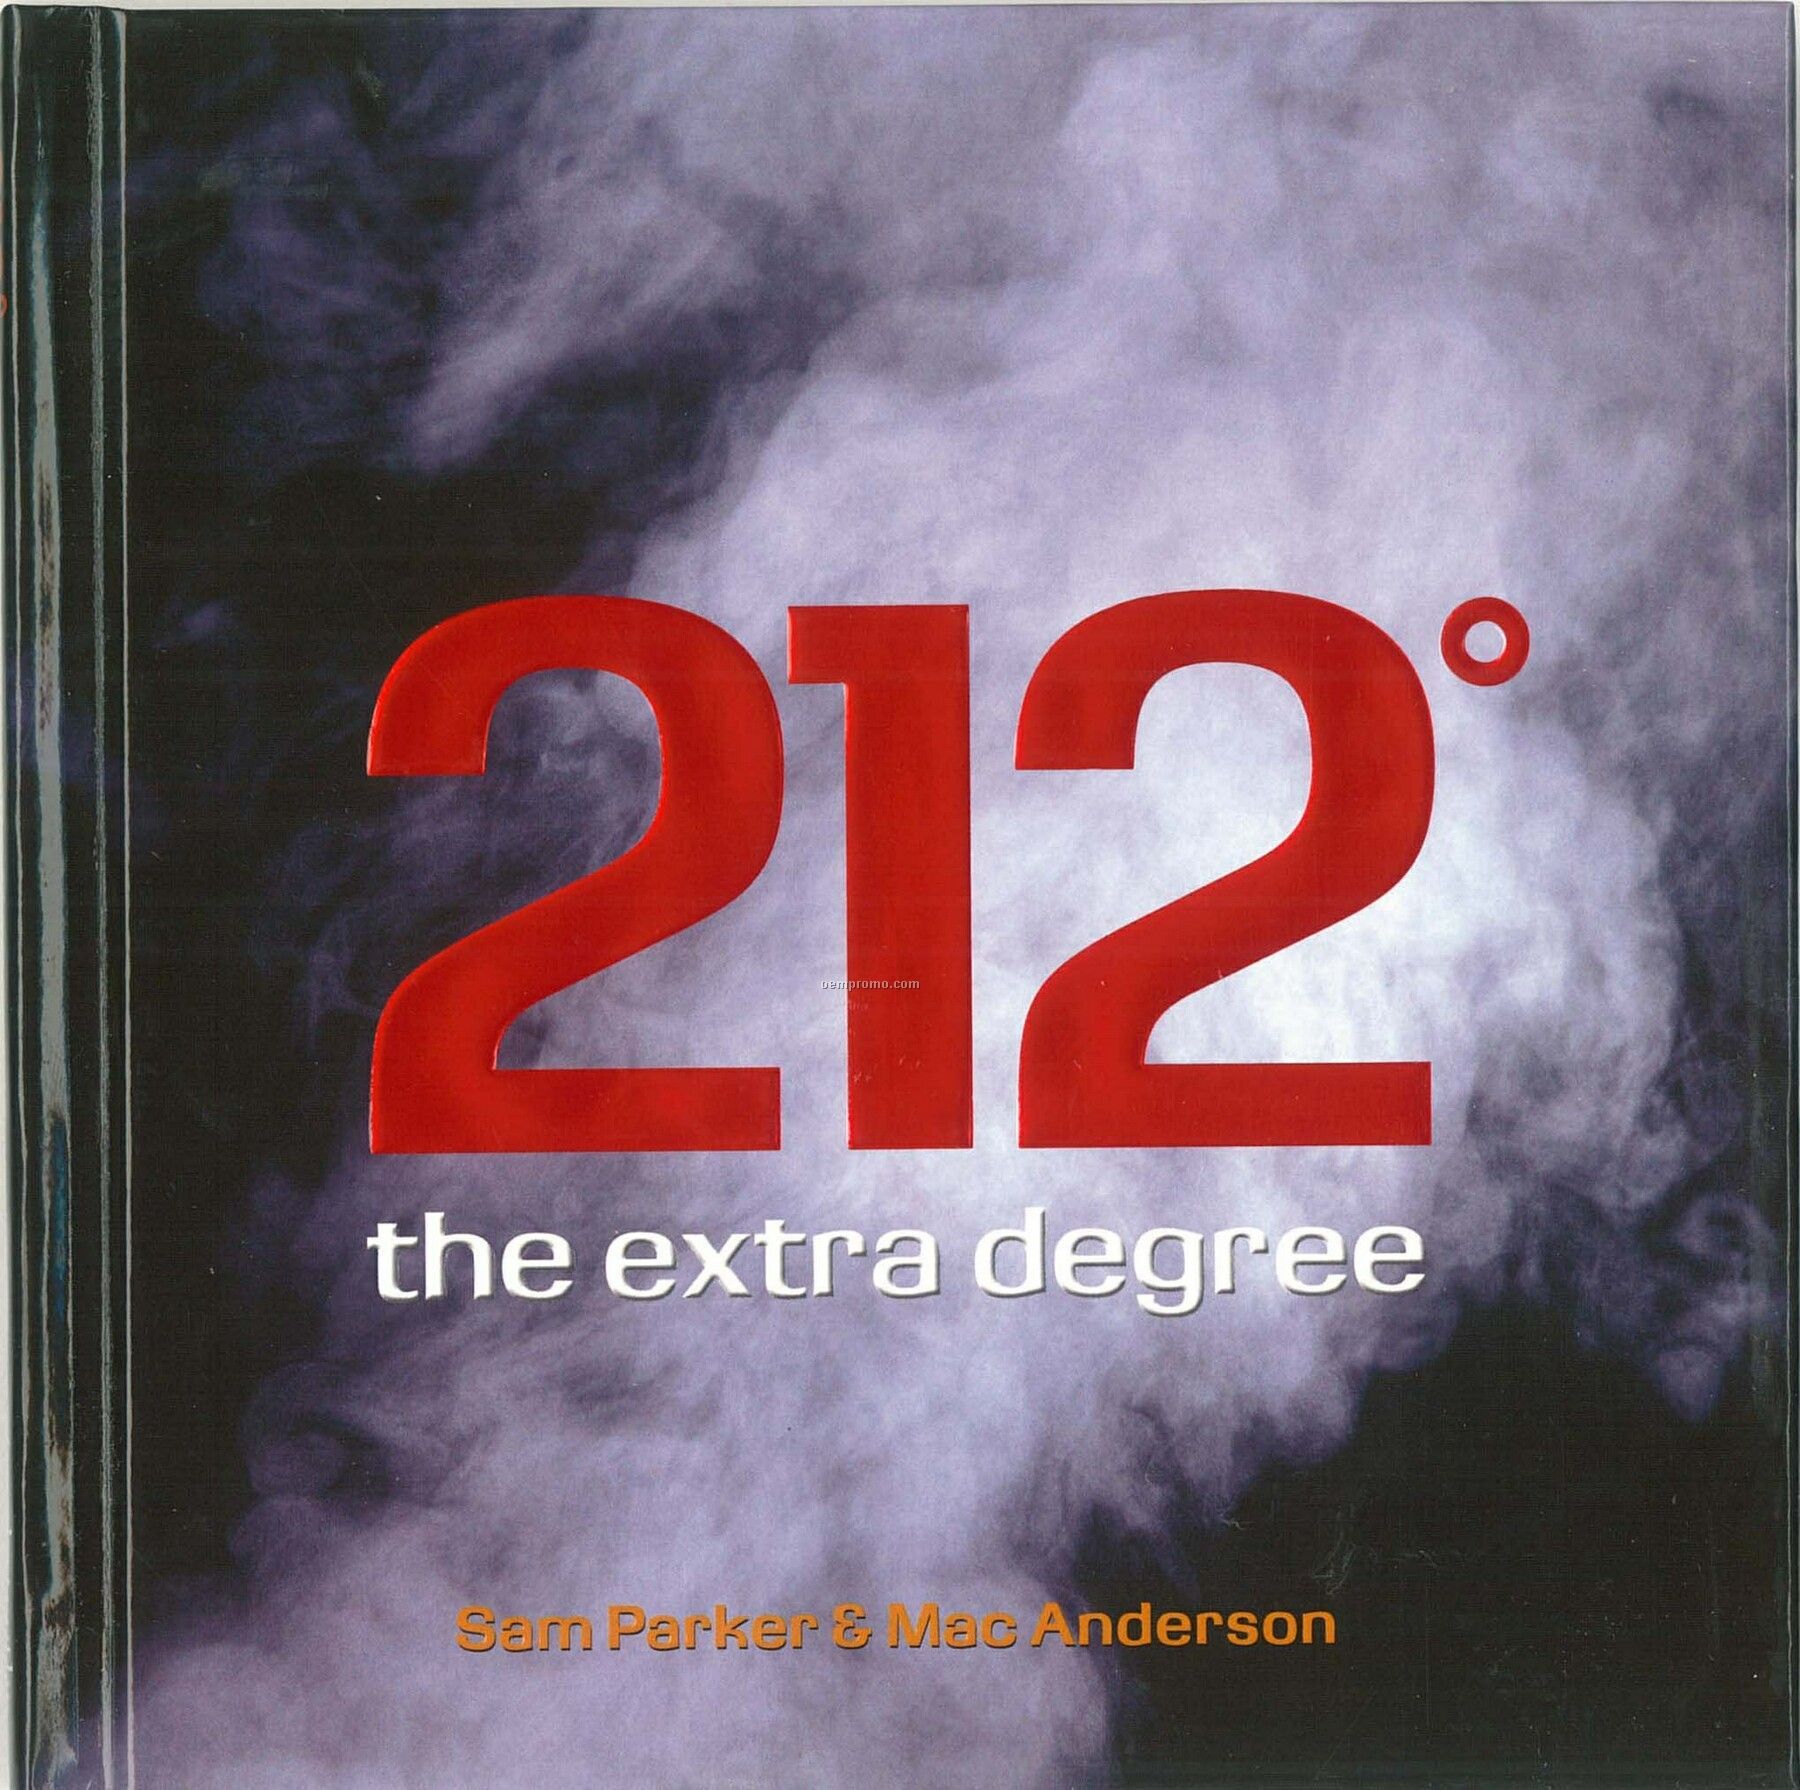 212 The Extra Degree - Business Books